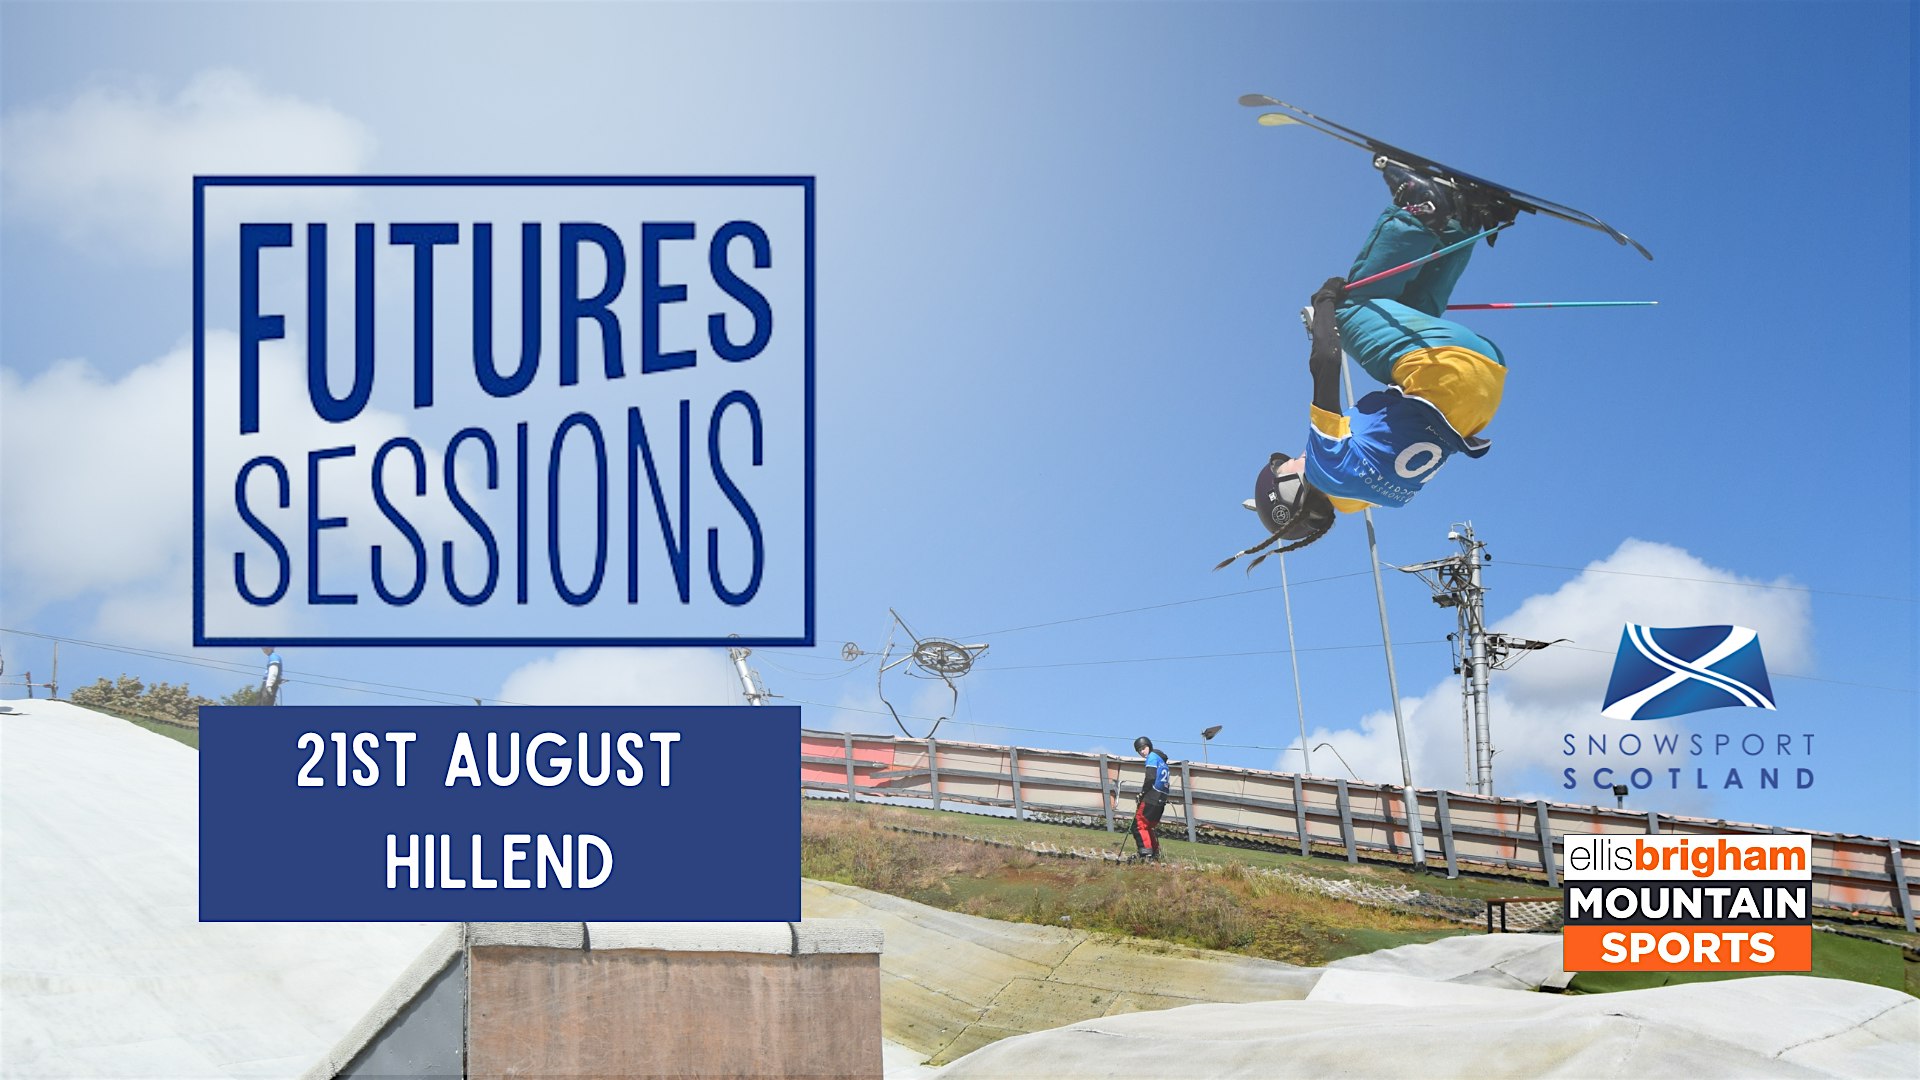 Futures Sessions - Park & Pipe skiing and snowboarding, 21 August | Event in Edinburgh | AllEvents.in